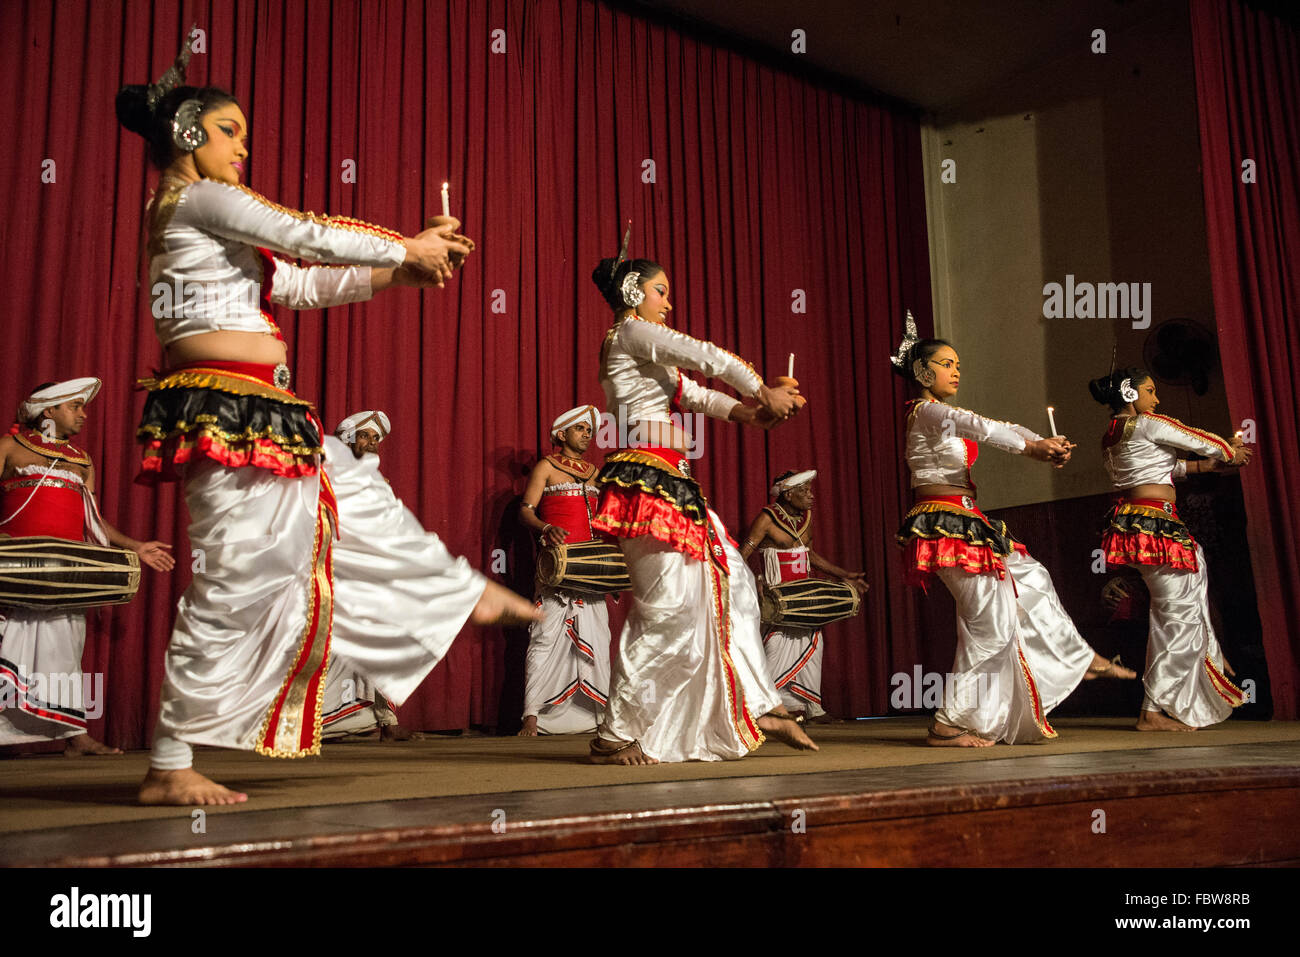 A group of Kandyan dancers performing the Pooja dance with the Kandyan drummers part of the Kandyan dance in Ksndy, Sri Lanka Stock Photo